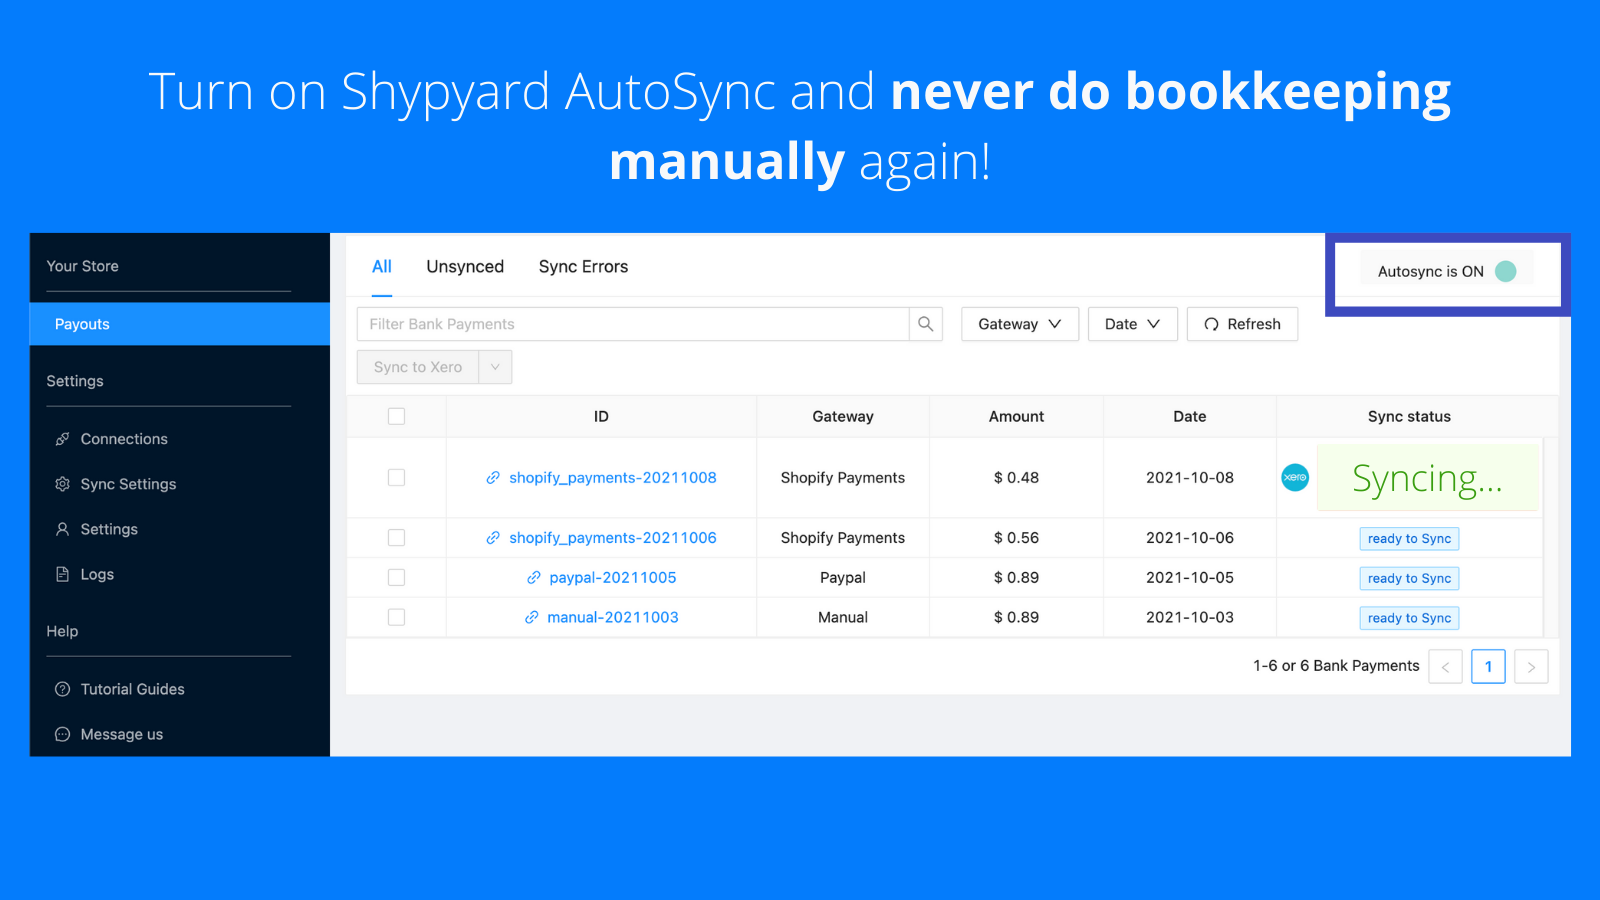 Turn on autosync and Shypyard takes care of your bookkeeping